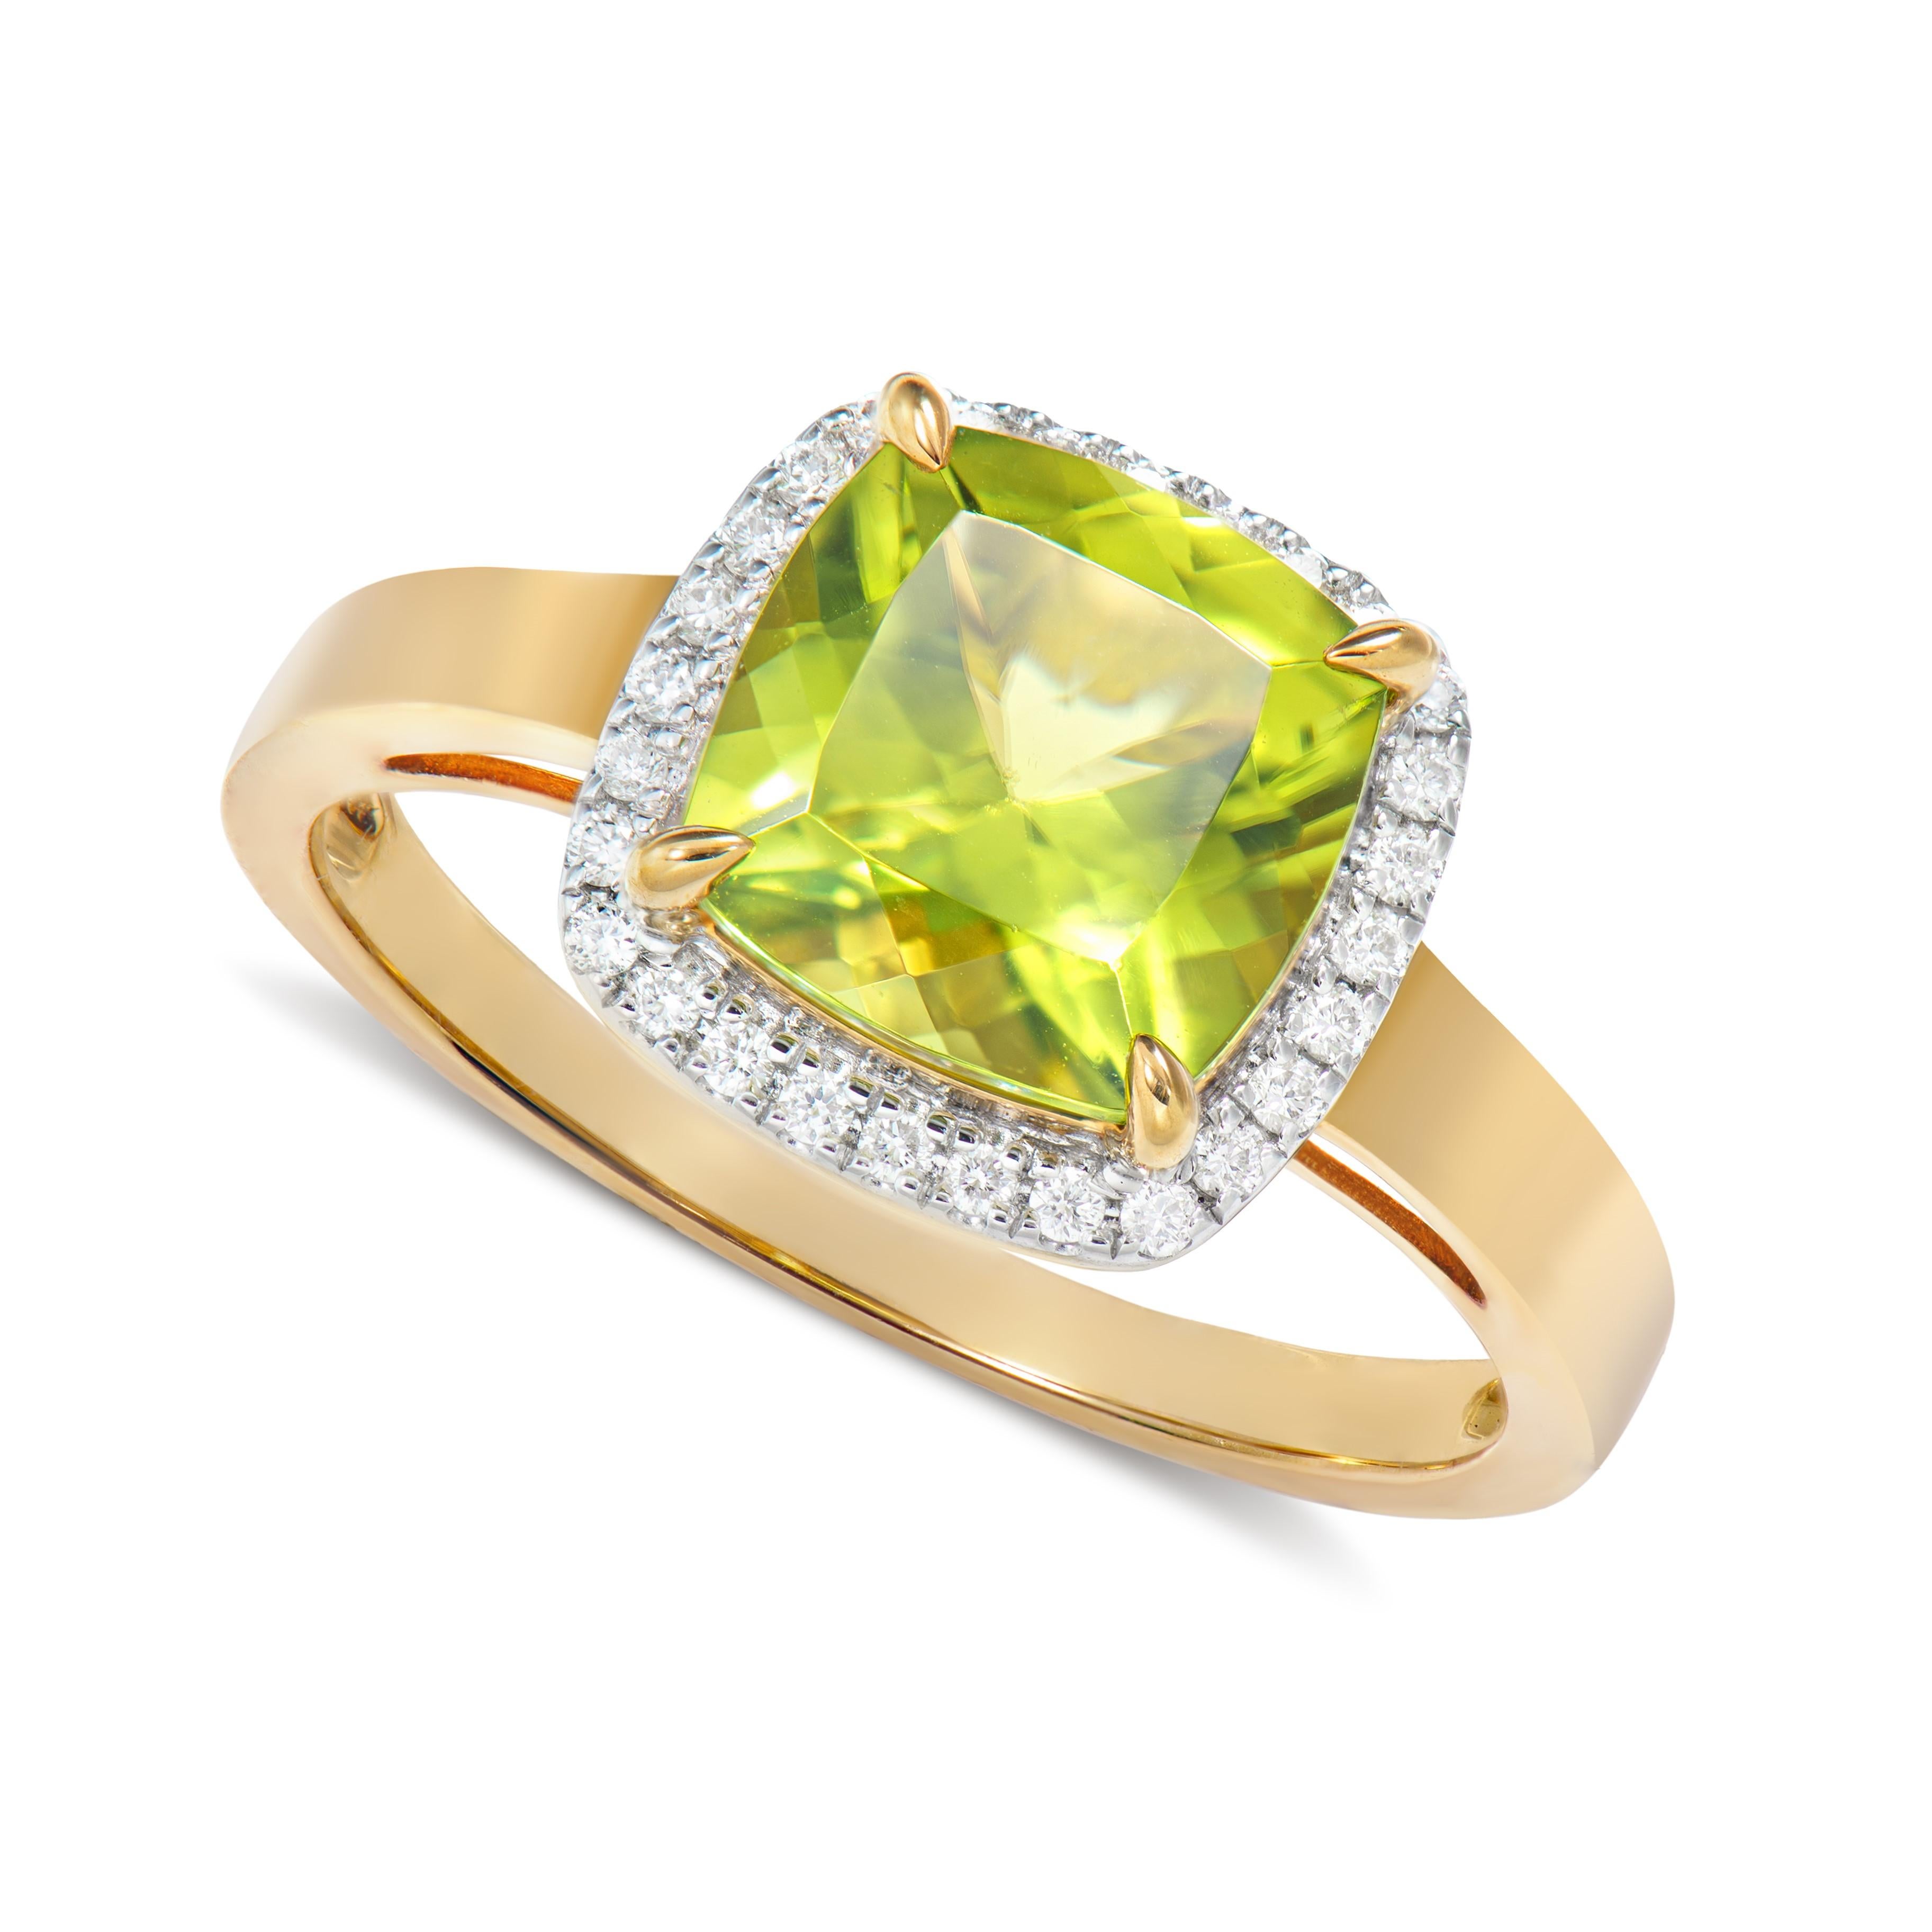 Contemporary 2.39 Carat Peridot Fancy Ring in 18Karat Yellow Gold with White Diamond.   For Sale